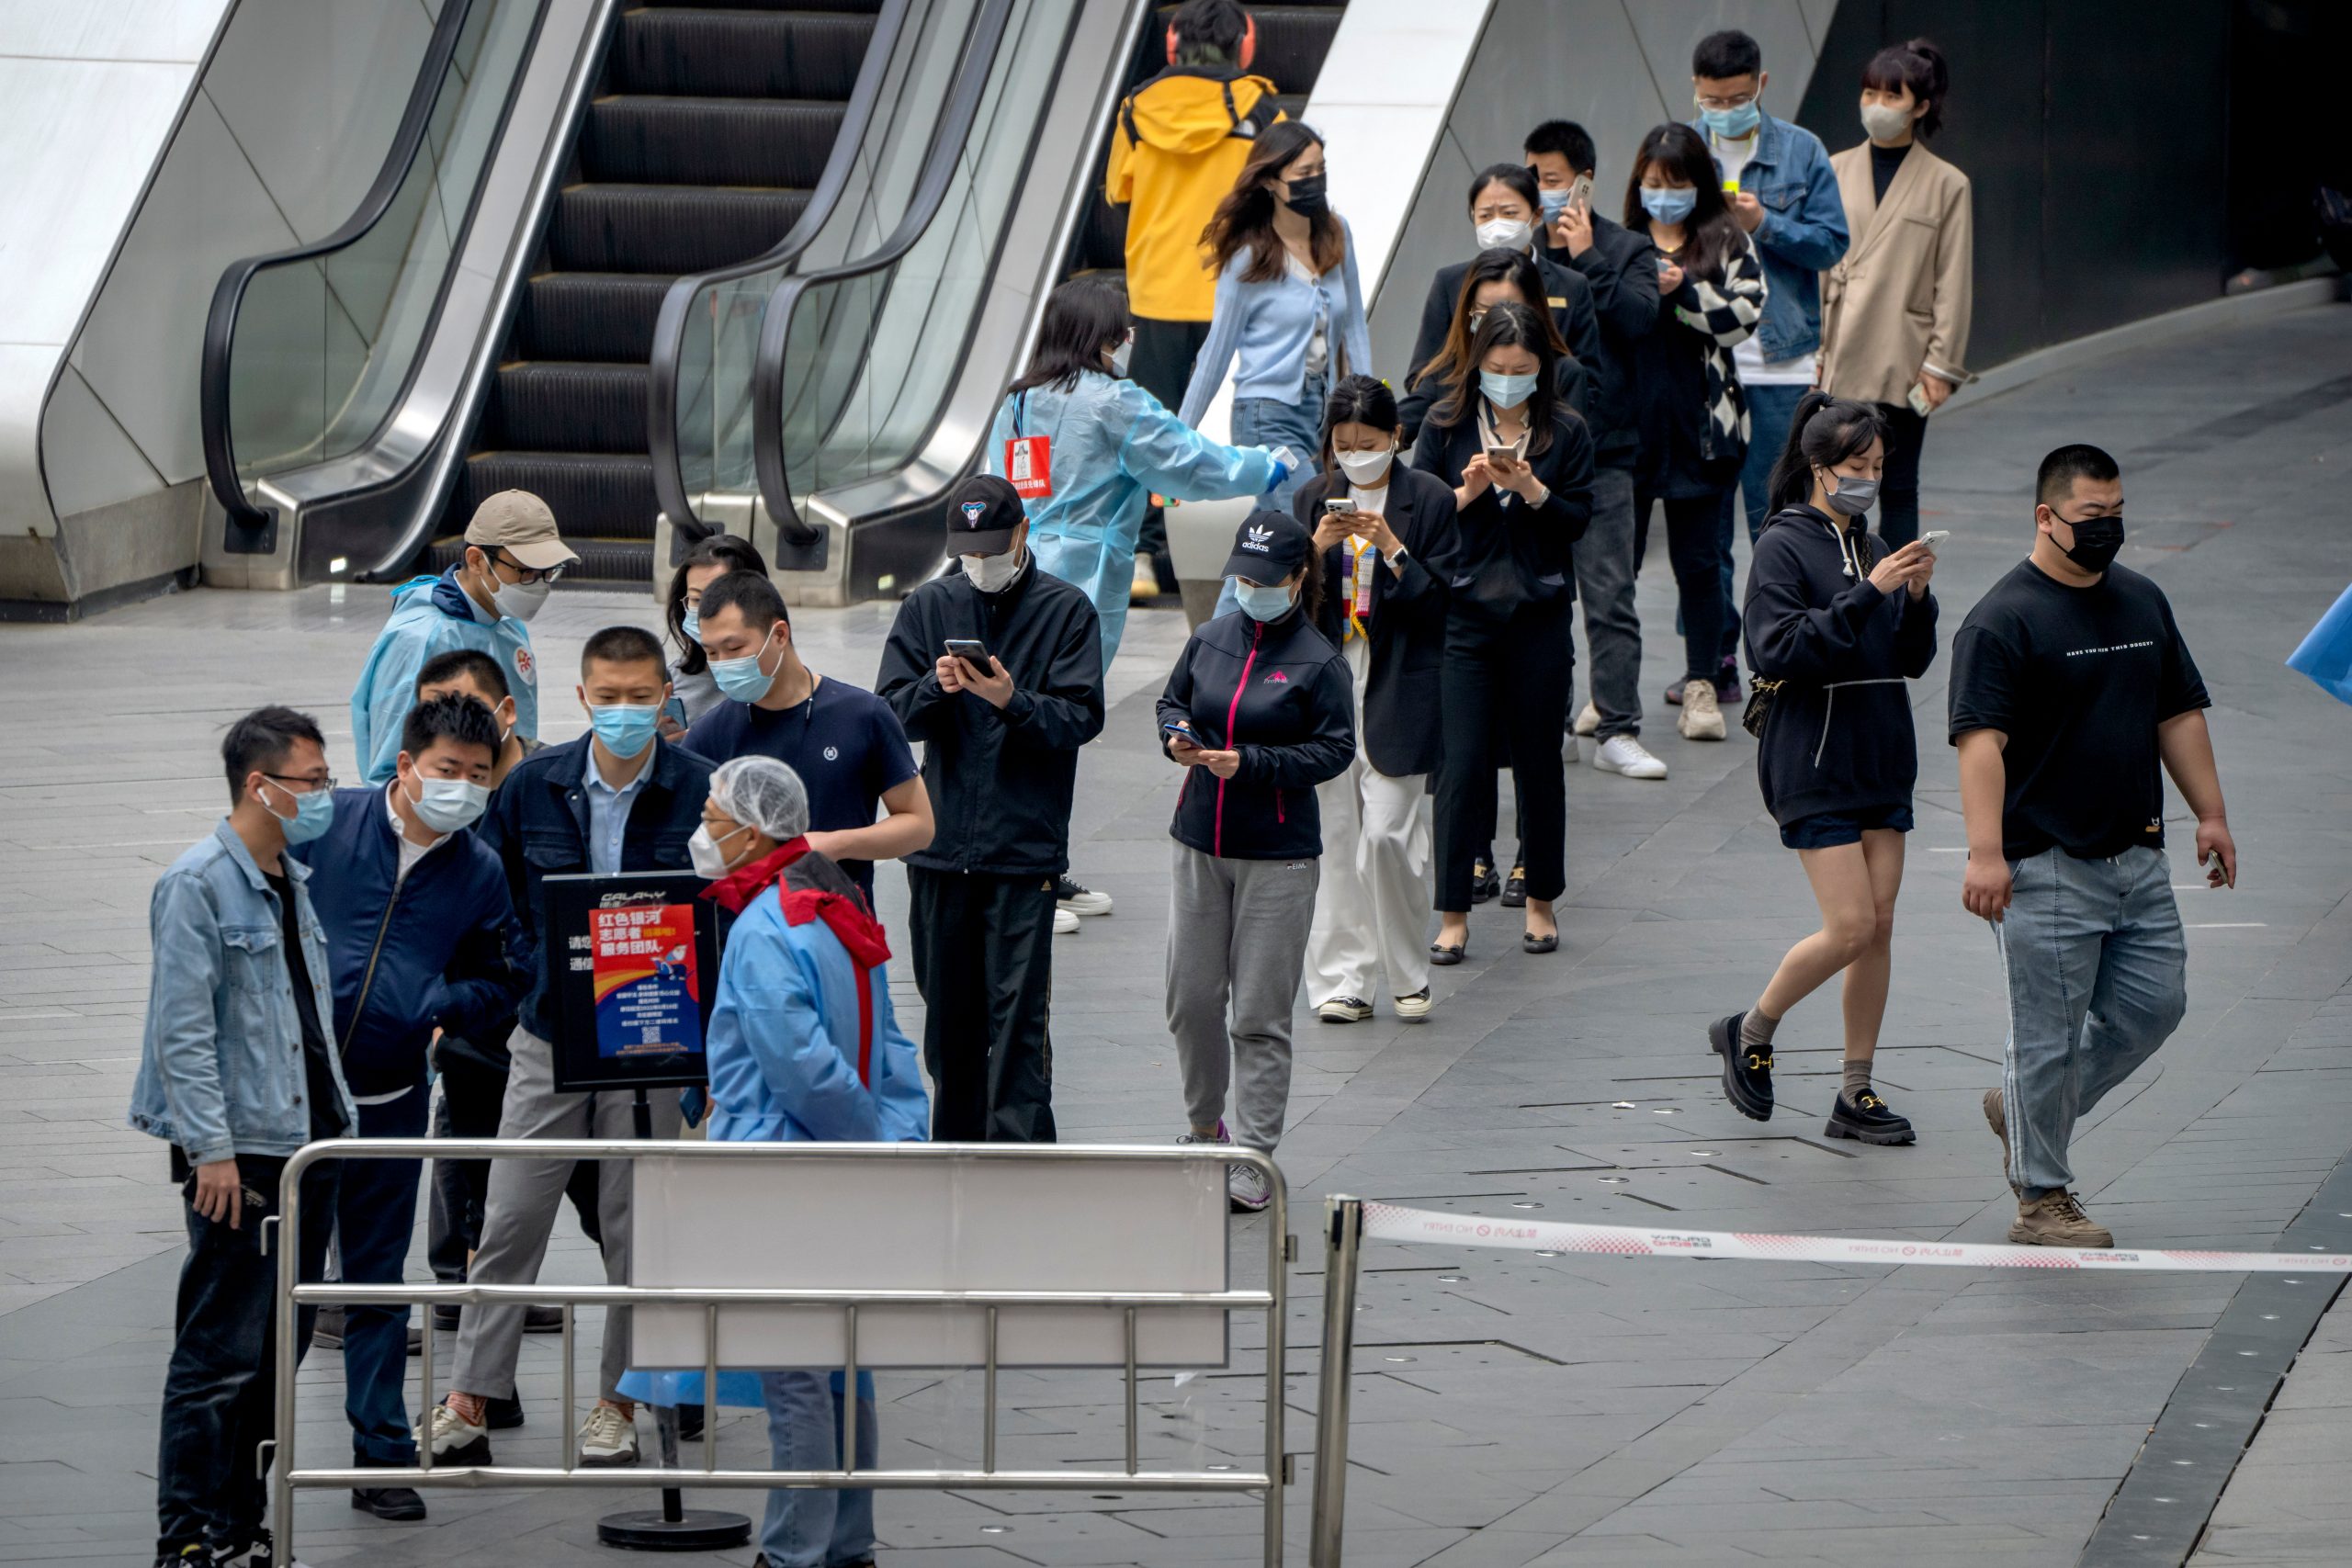 Shanghai’s COVID troubles shift to Beijing in worsening outbreak